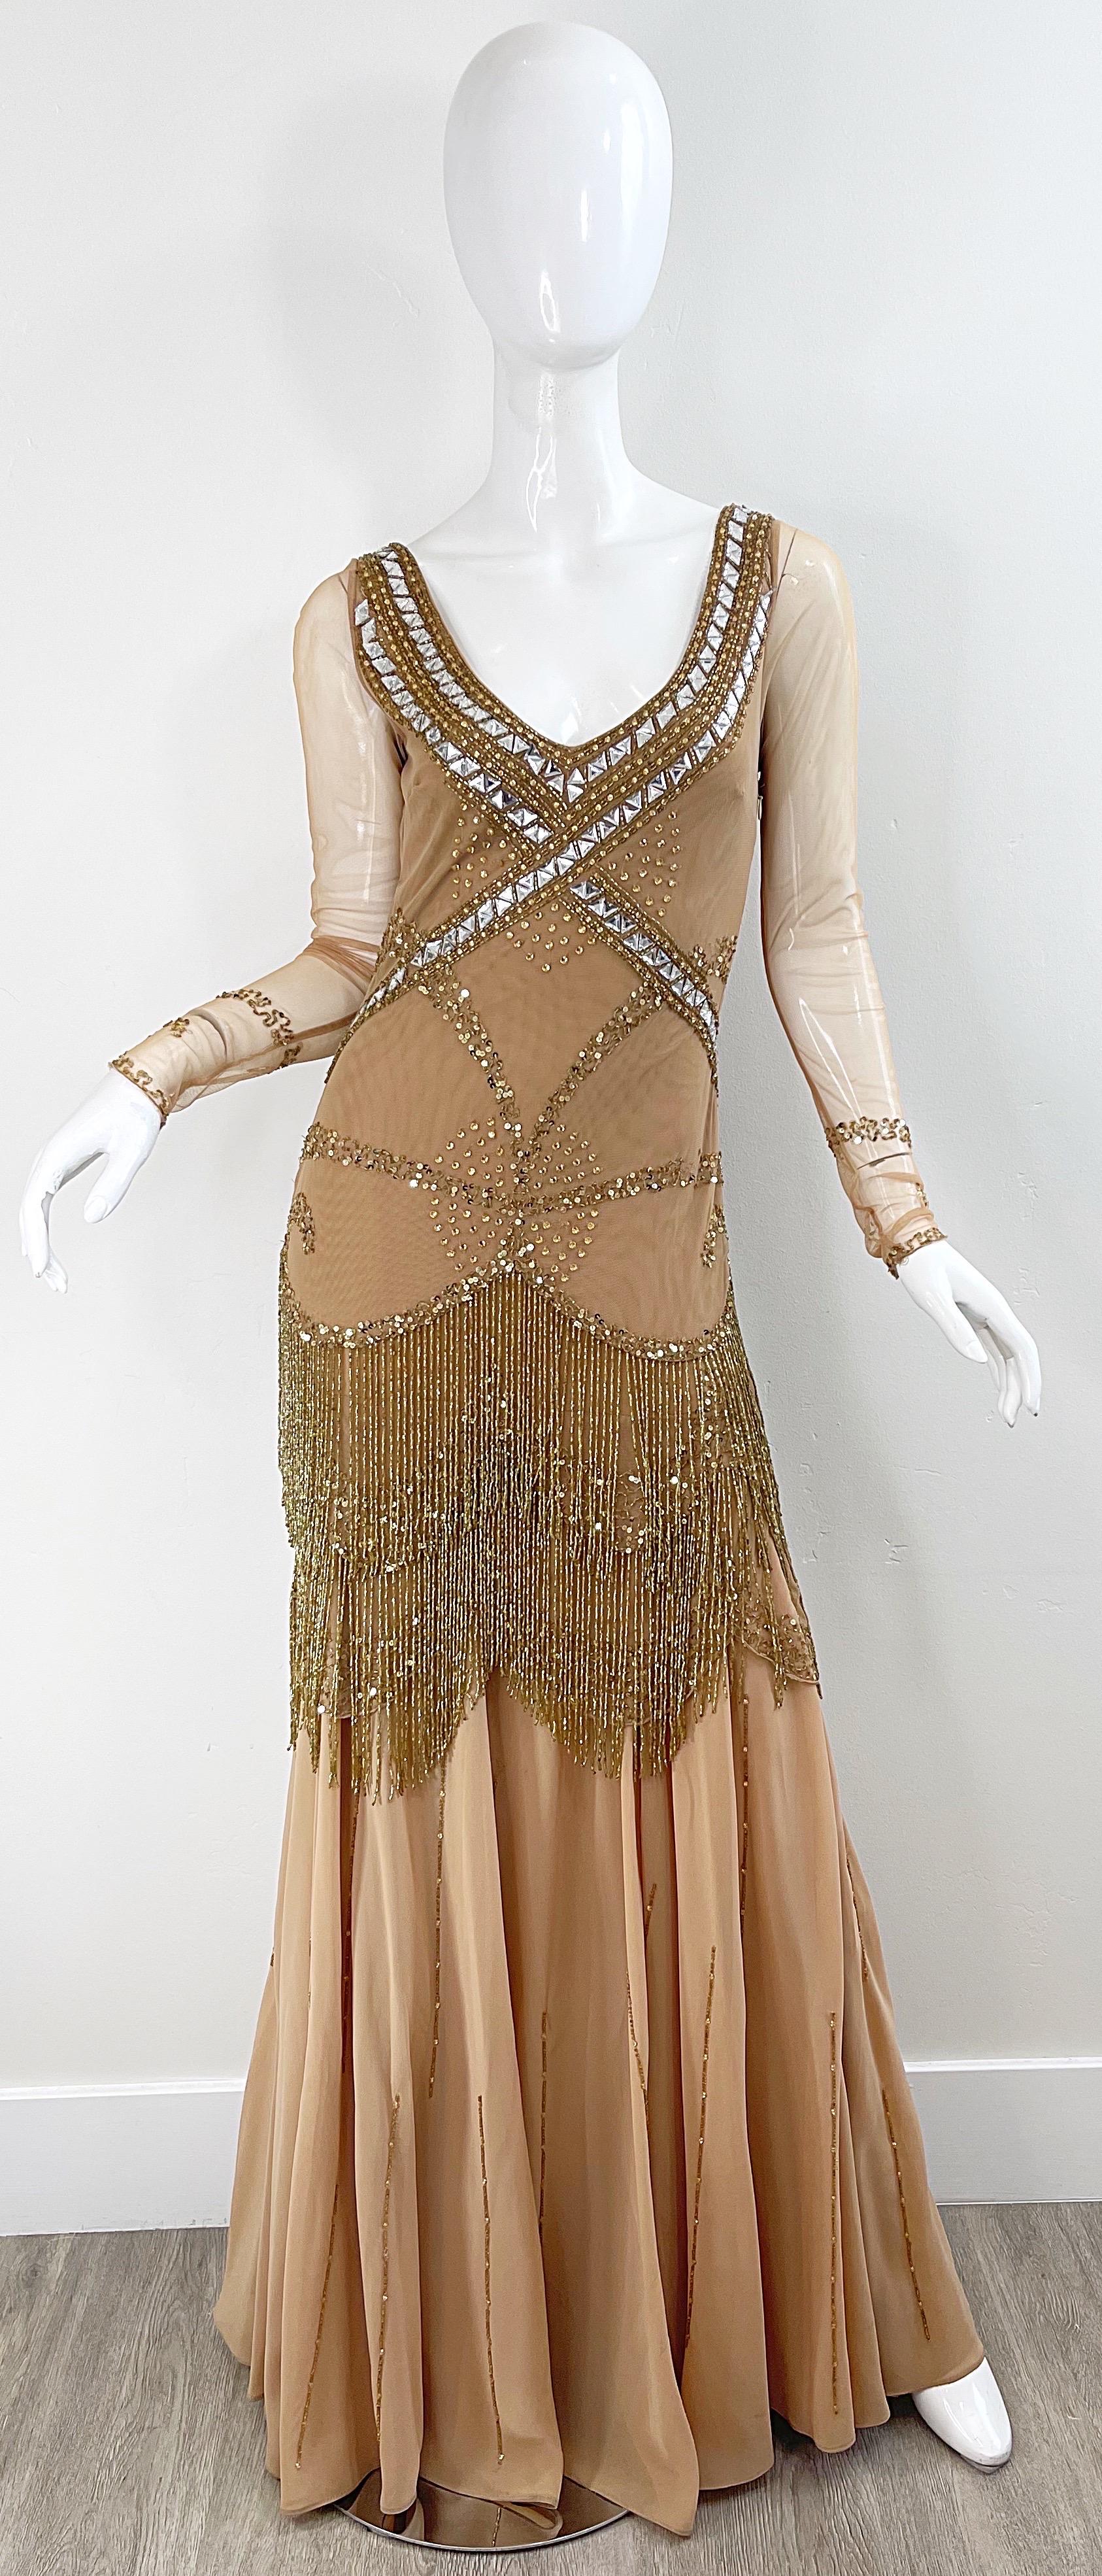 Roberto Cavalli Class 2000s Nude Gold Size 2 / 4 Deco Beaded Fringe Mesh Dress  In Excellent Condition For Sale In San Diego, CA